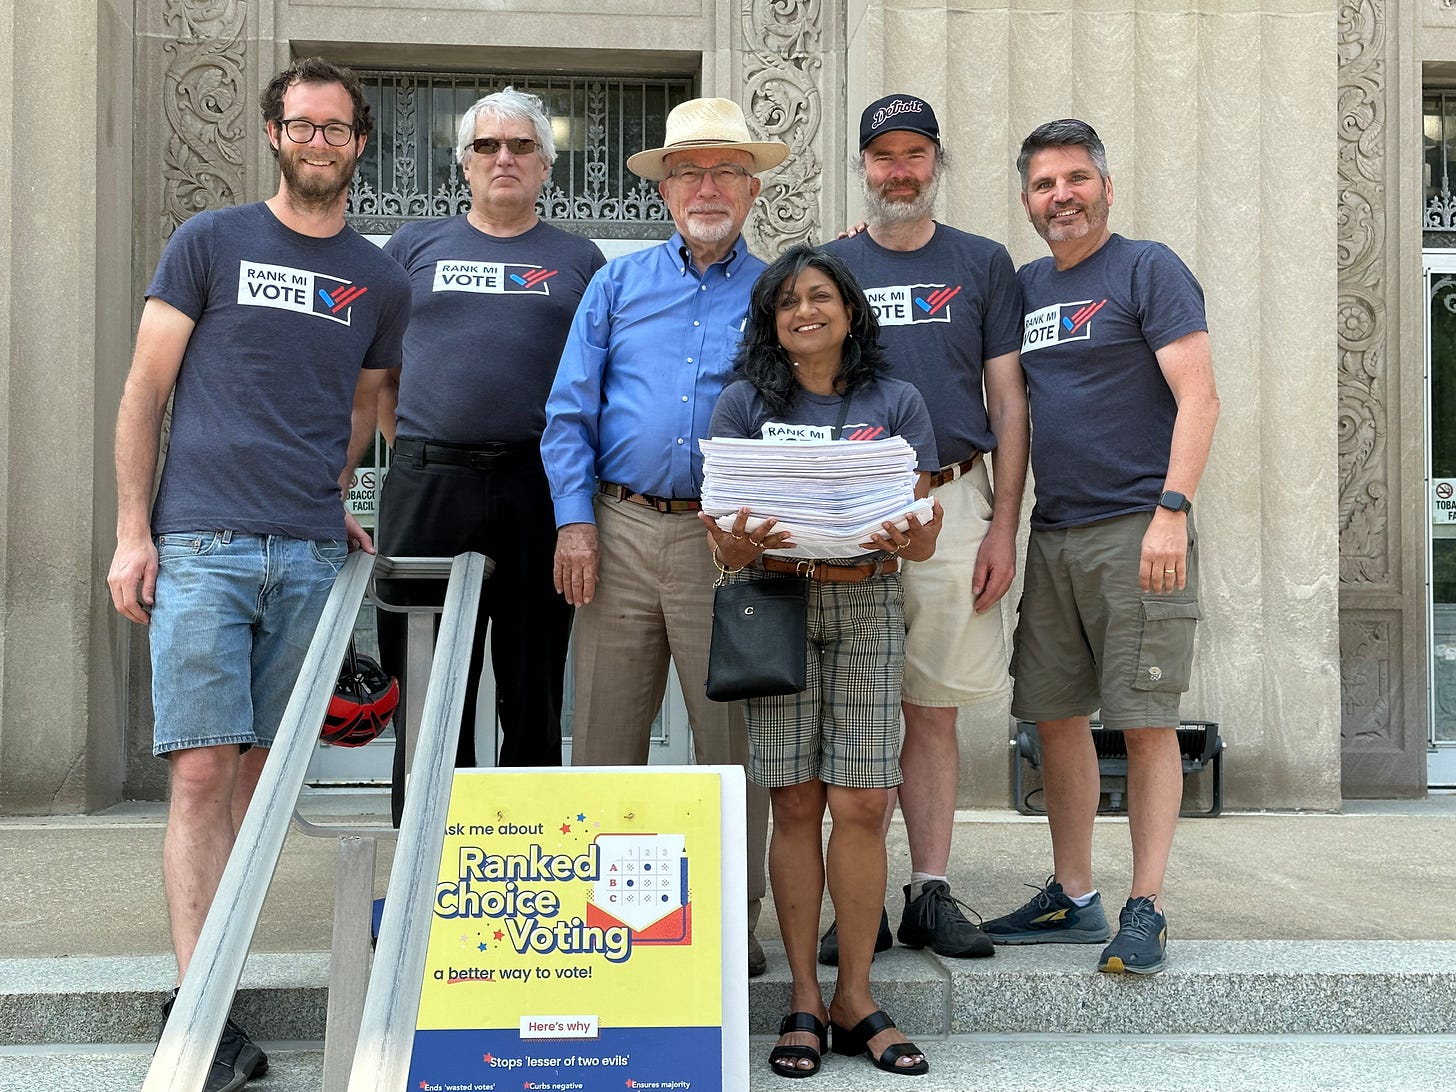 Rank MI Vote volunteers in front of Kalamazoo City Hall on Wednesday, May 24, 2023, before submitting 520 initiative petition sheets to the City Clerk's office.  Pictured (L to R) are Justin Barney, Paul Vanryswyk, Jack Urban, Christina Dorett, Jeff Messer, and Ron Zimmerman.  Photograph taken by WMU Political Science Chair John Clark.